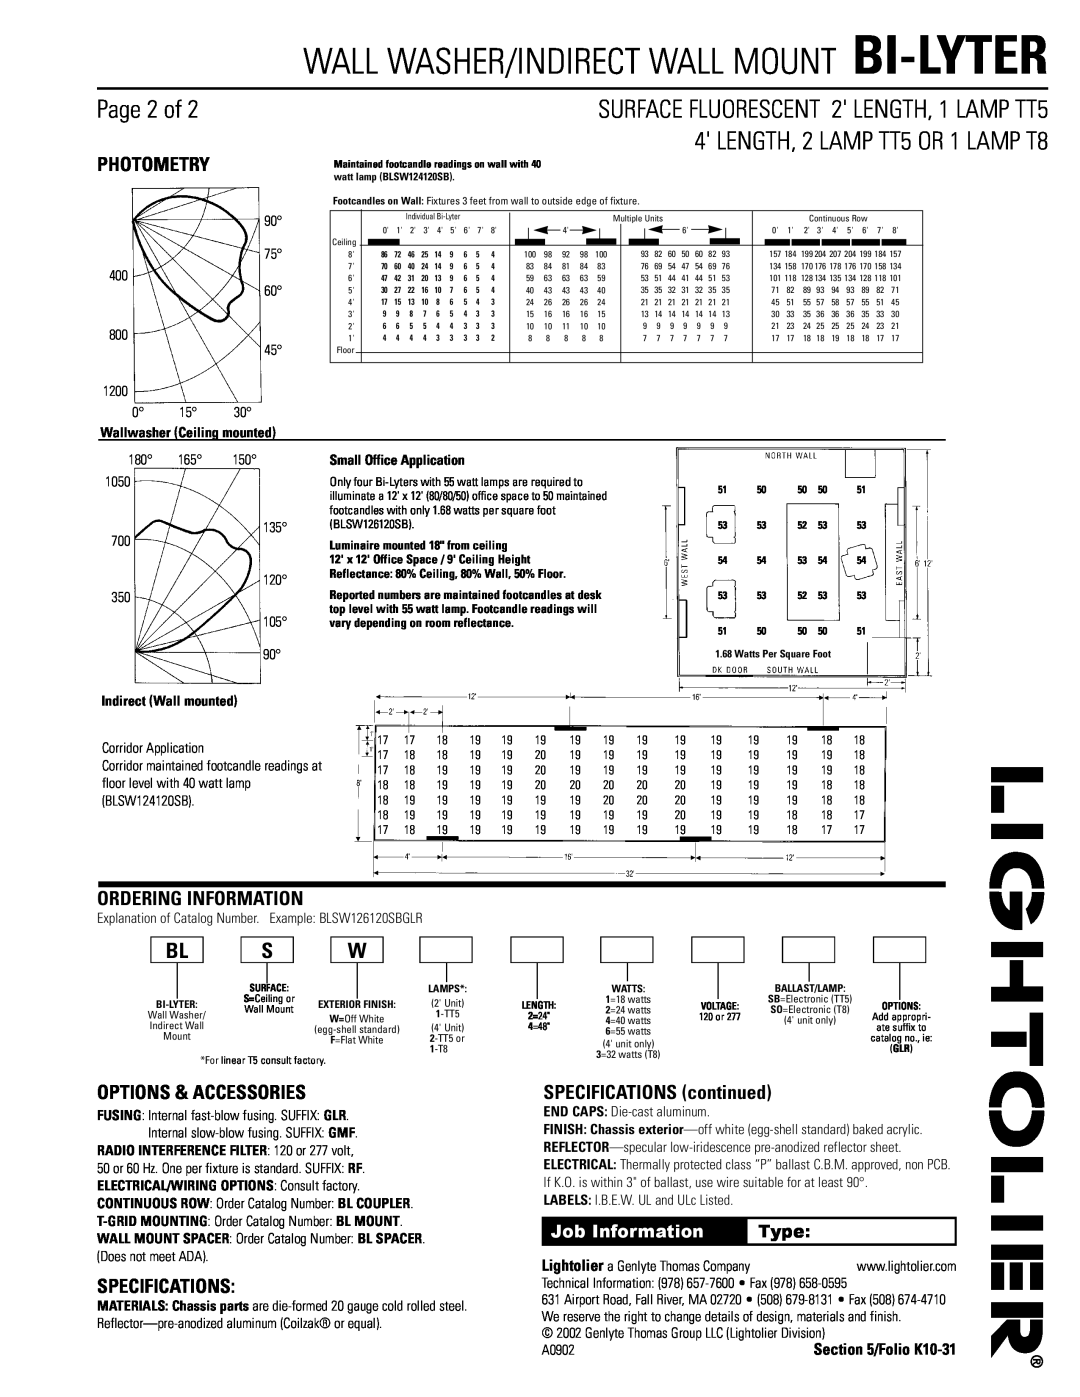 Lightolier BI-LYTER Page 2 of, Photometry, Ordering Information, Options & Accessories, Specifications, Job Information 